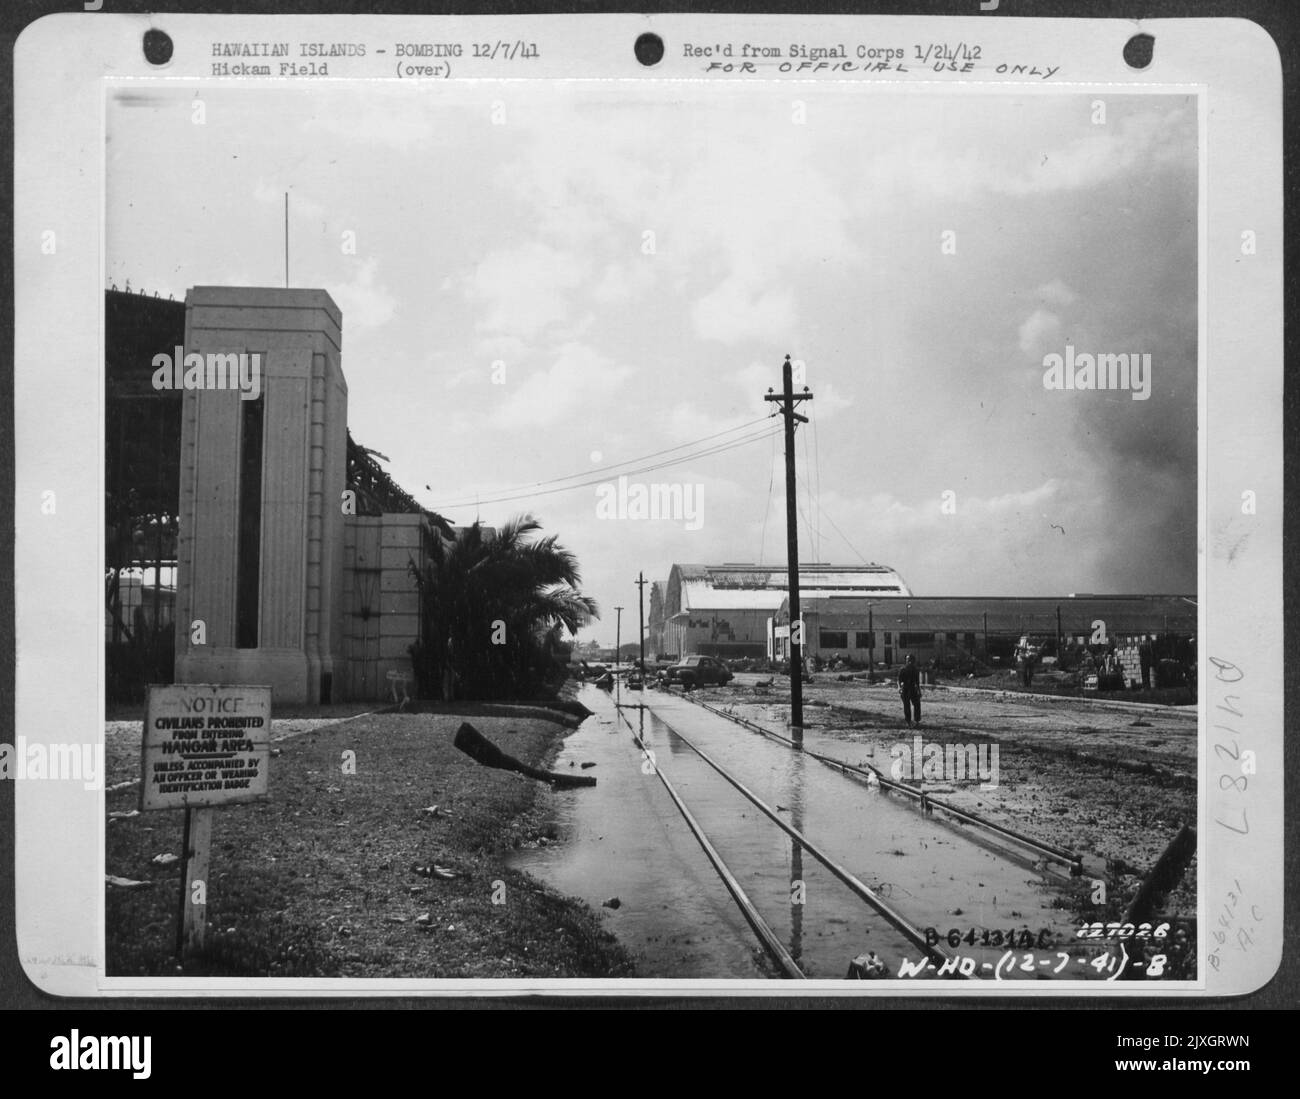 Hawaiian Islands - Bombing 12/7/41 - Hickam Field, First Army Photos Of Bombing Of Hawaii, Dec. 7, 1941. Looking South Down Hanagr Avenue With Largest Hangars In Background Damaged By Fire. Hickam Field, Hawaii. Stock Photo